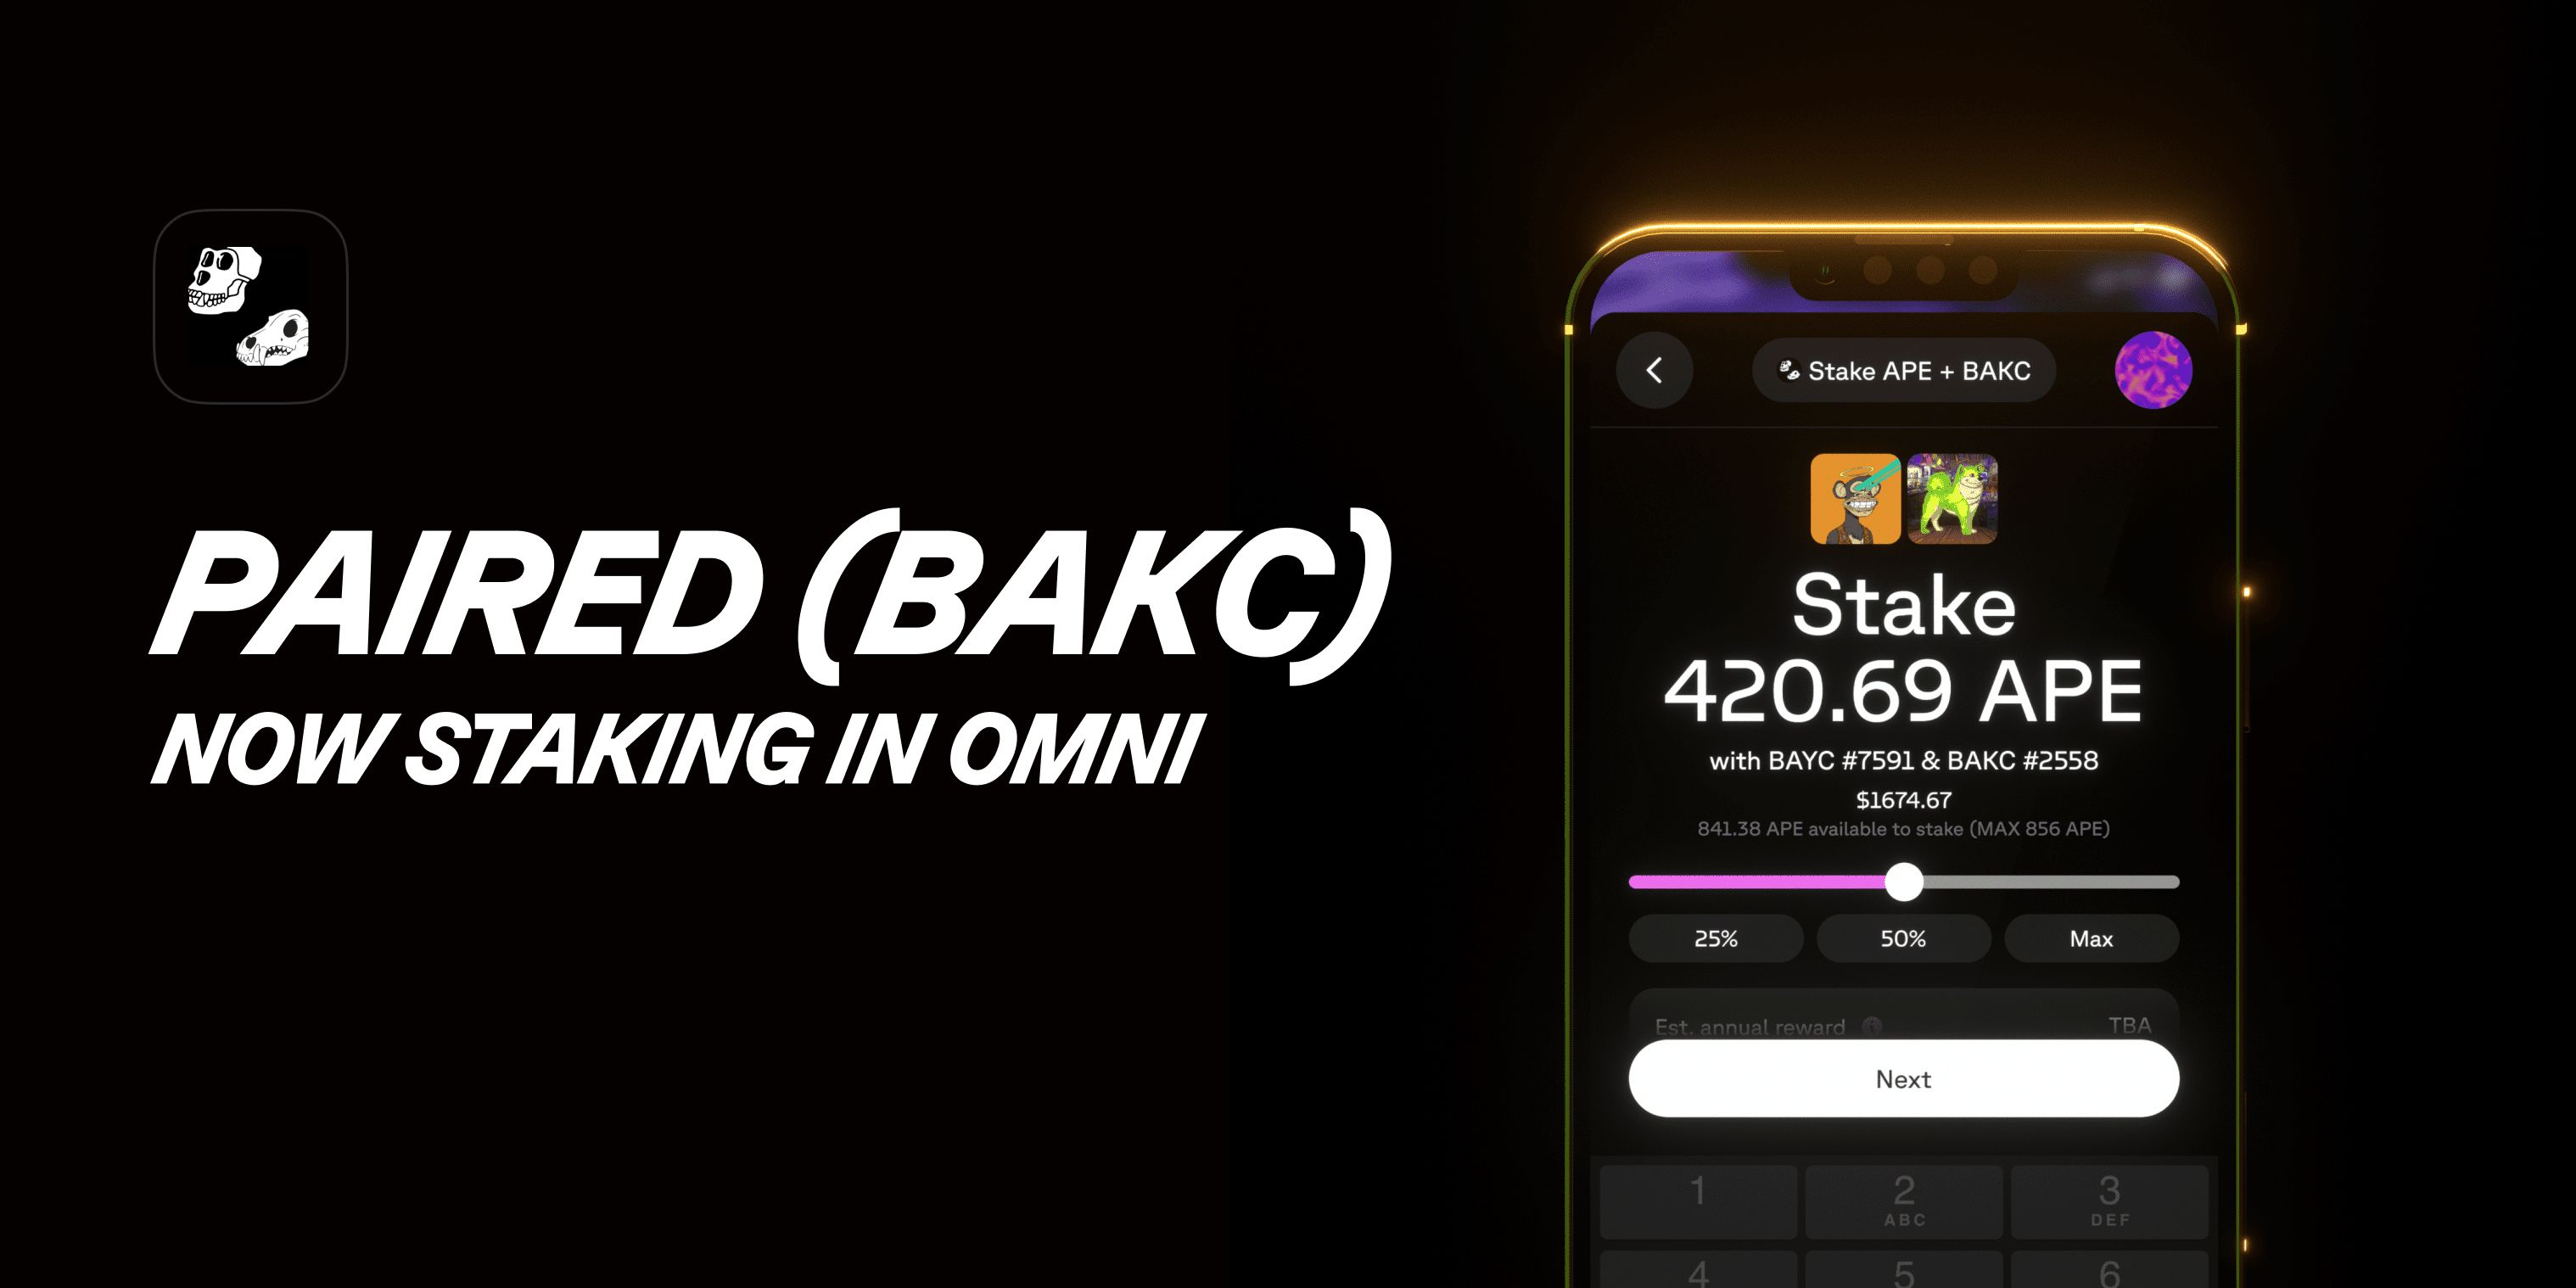 Cover Image for A step-by-step guide to paired BAKC staking on Omni